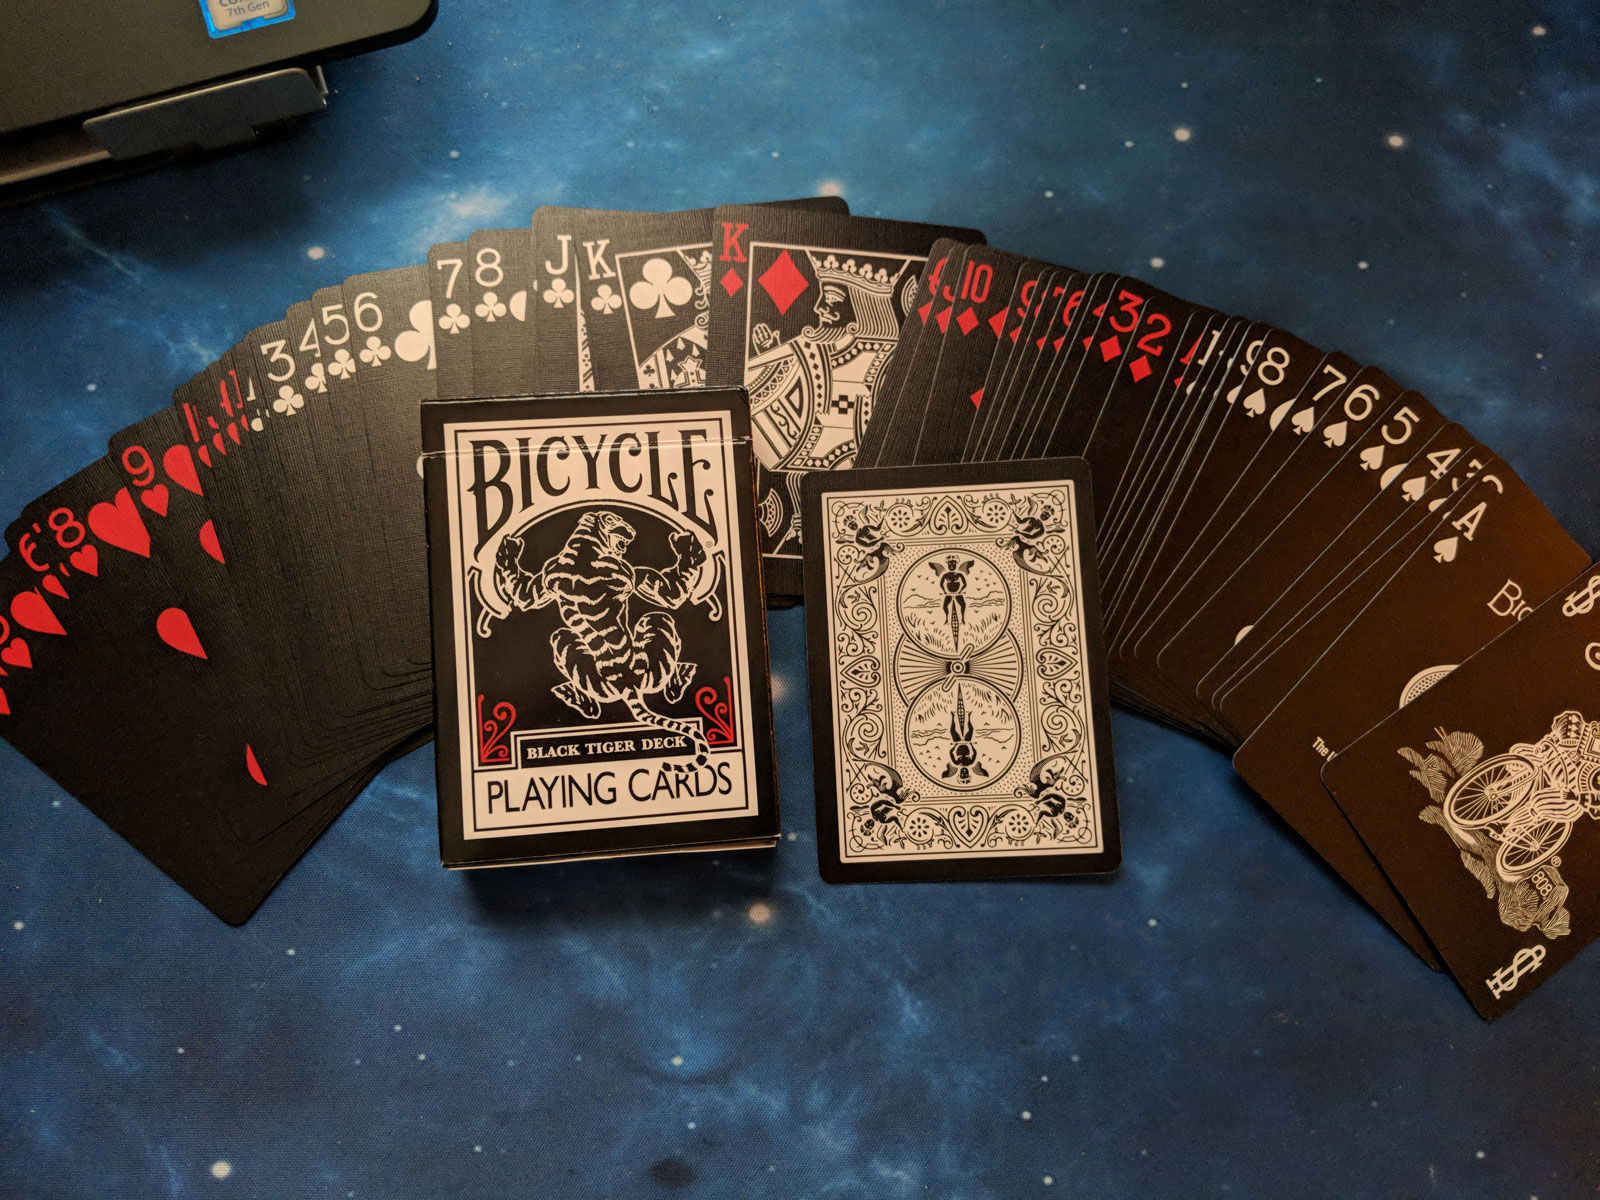 Devil Bicycle Playing Cards - HD Wallpaper 